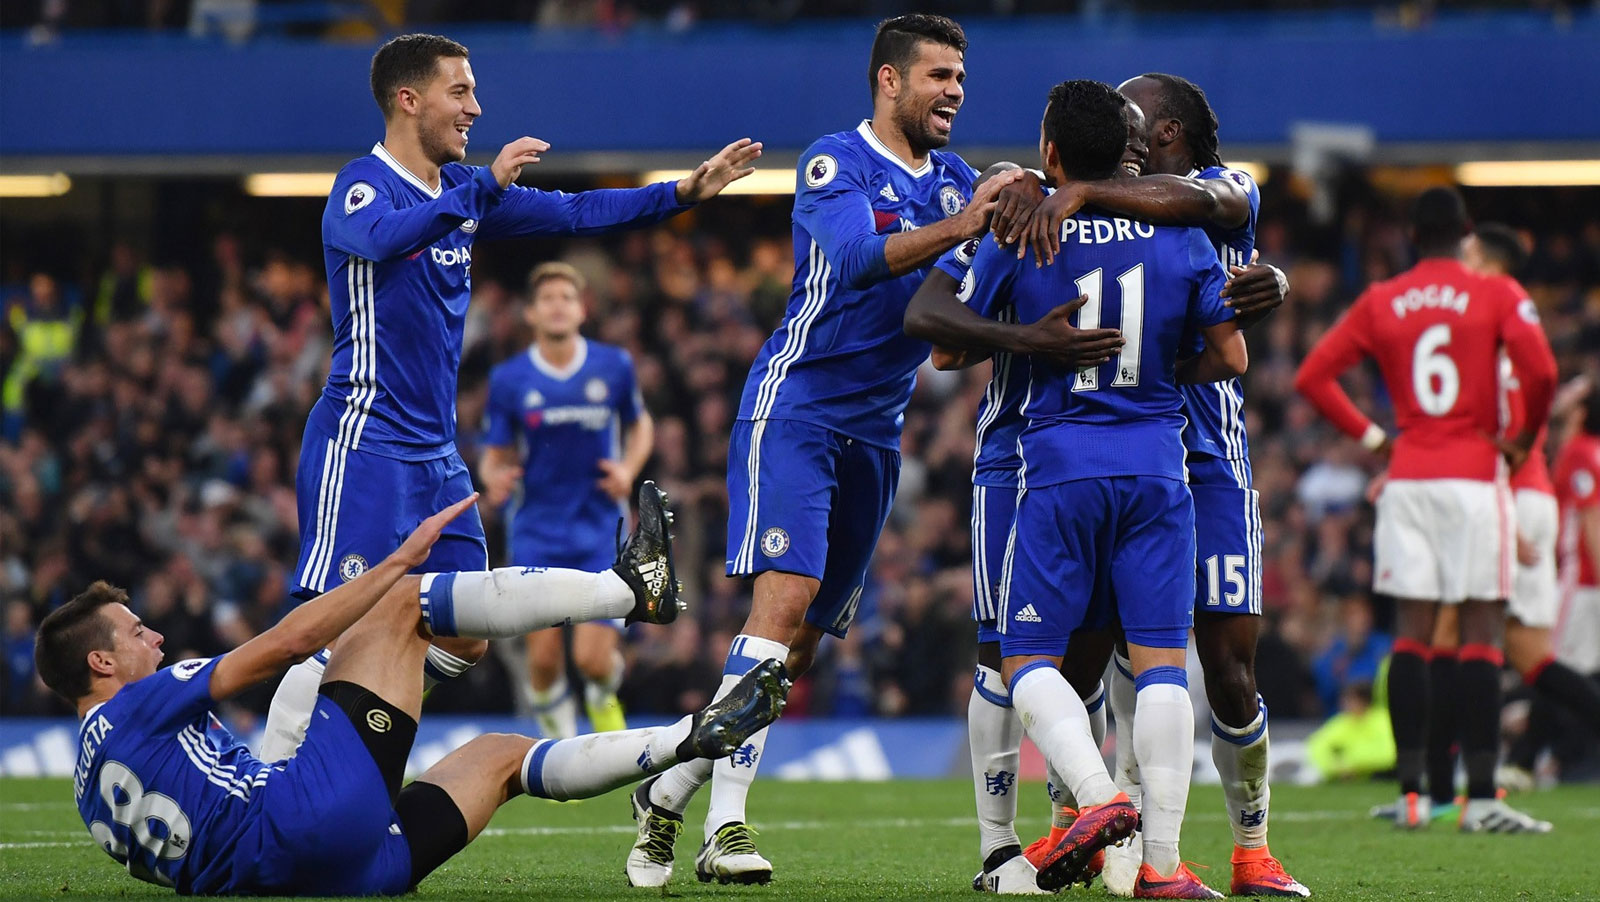 FA Cup Final Review: Chelsea beat United in what could be Conte’s final game